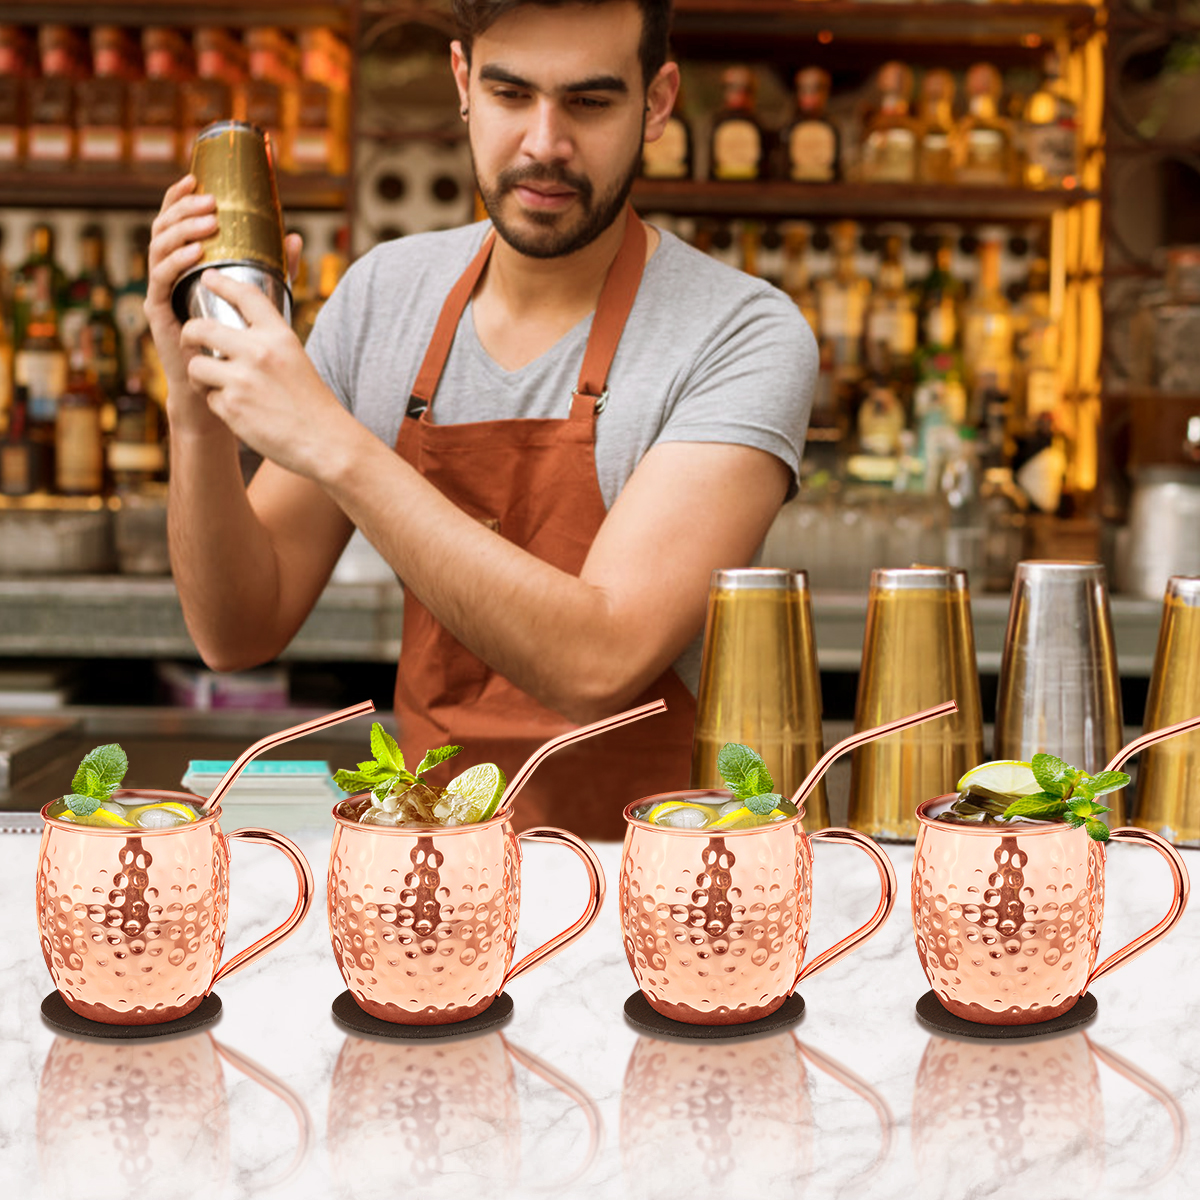 Moscow-Mule-Cups-Set-Copper-Mugs-Moscow-Mule-Mug-with-Shot-Glasses-1947569-19